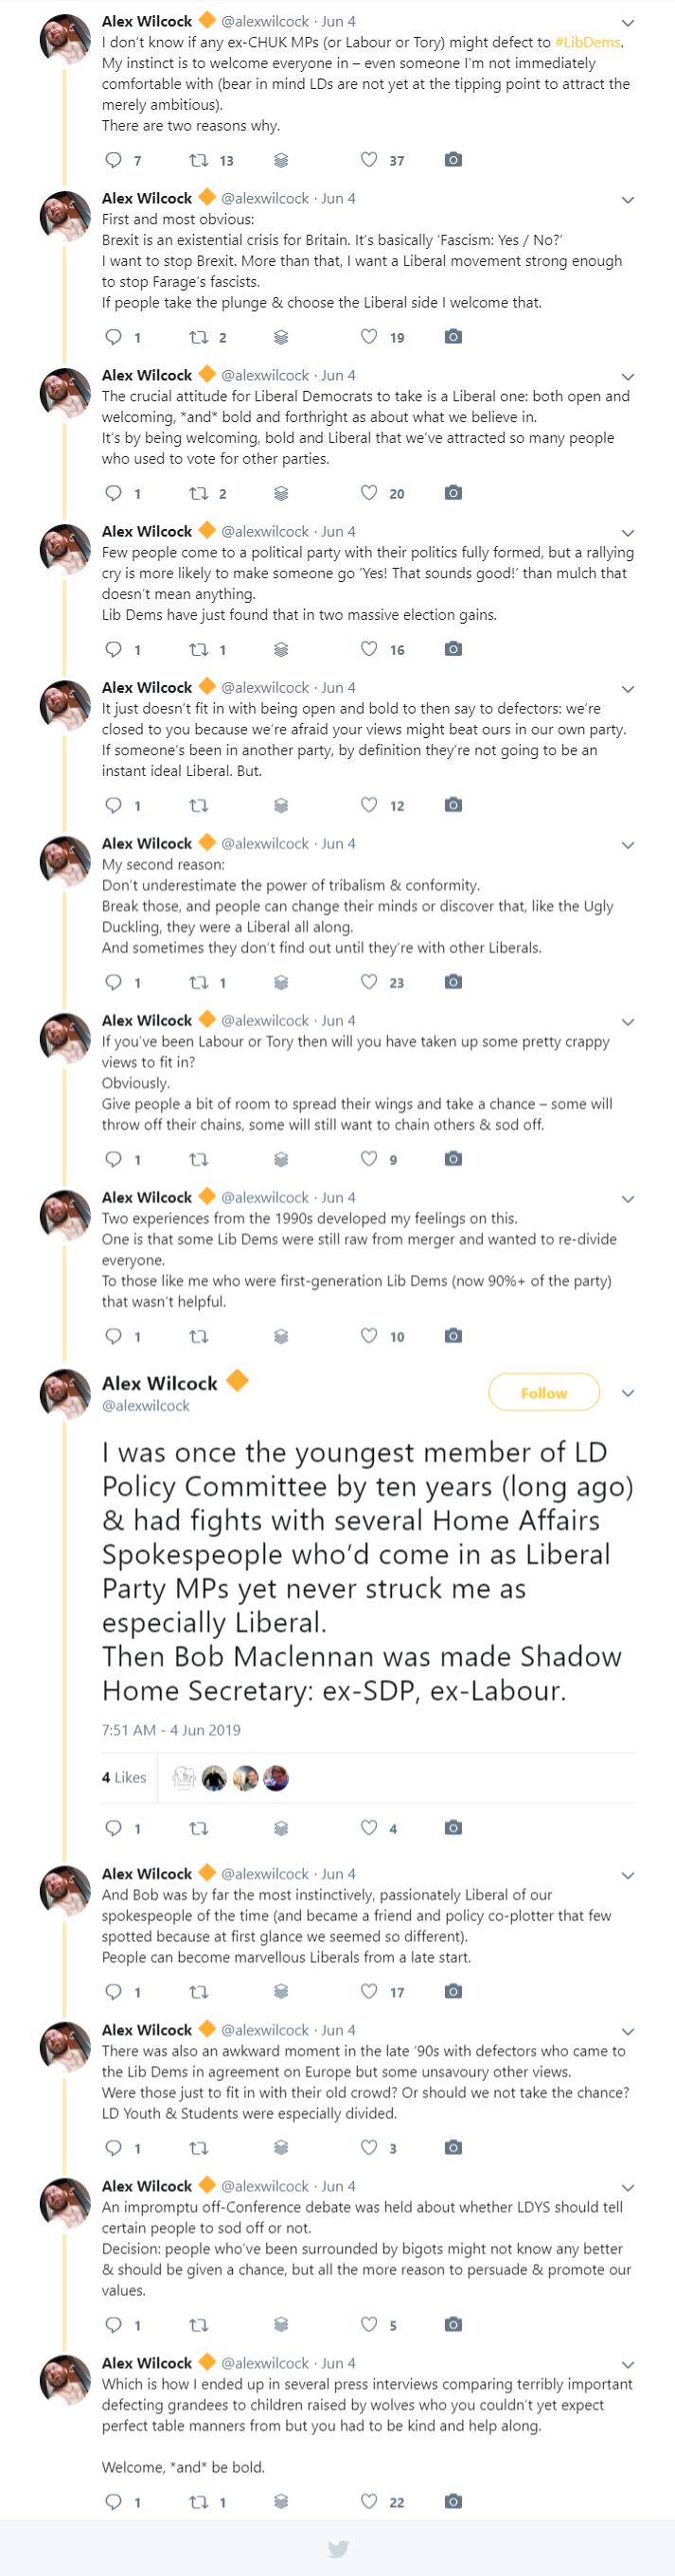 Alex Wilcock on welcoming new MPs into the Liberal Democrats